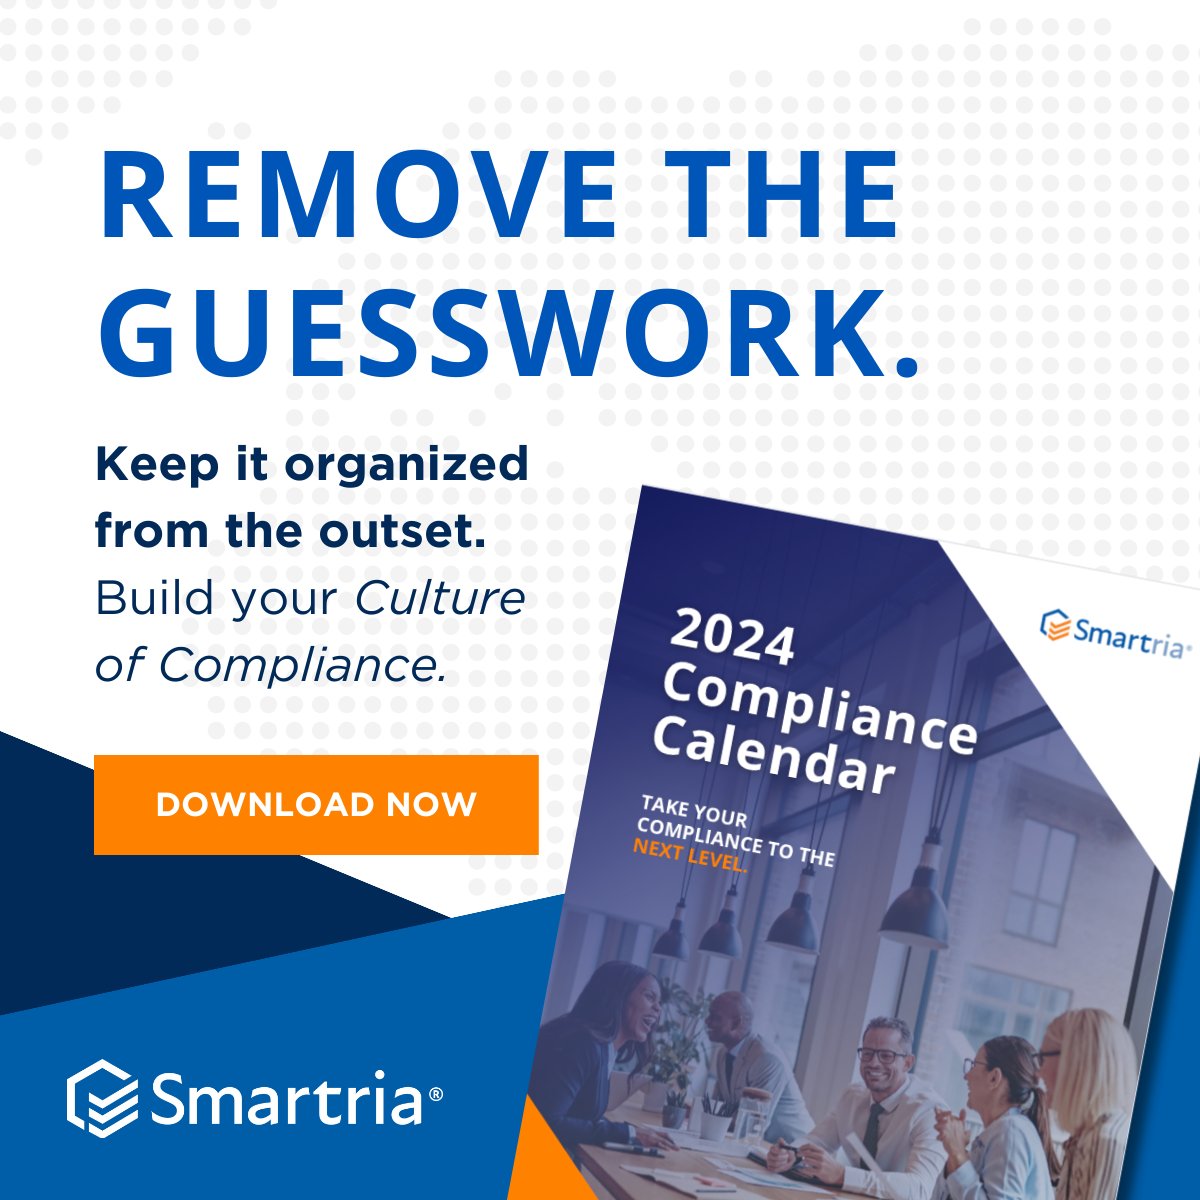 Spend less time on the minutiae and more on growth strategies. No complications, delays, or inconvenience—just integrated tools for smoother workflows.
Download our 2024 compliance calendar: hubs.li/Q02lpRWV0

#ComplianceTech #WealthTech